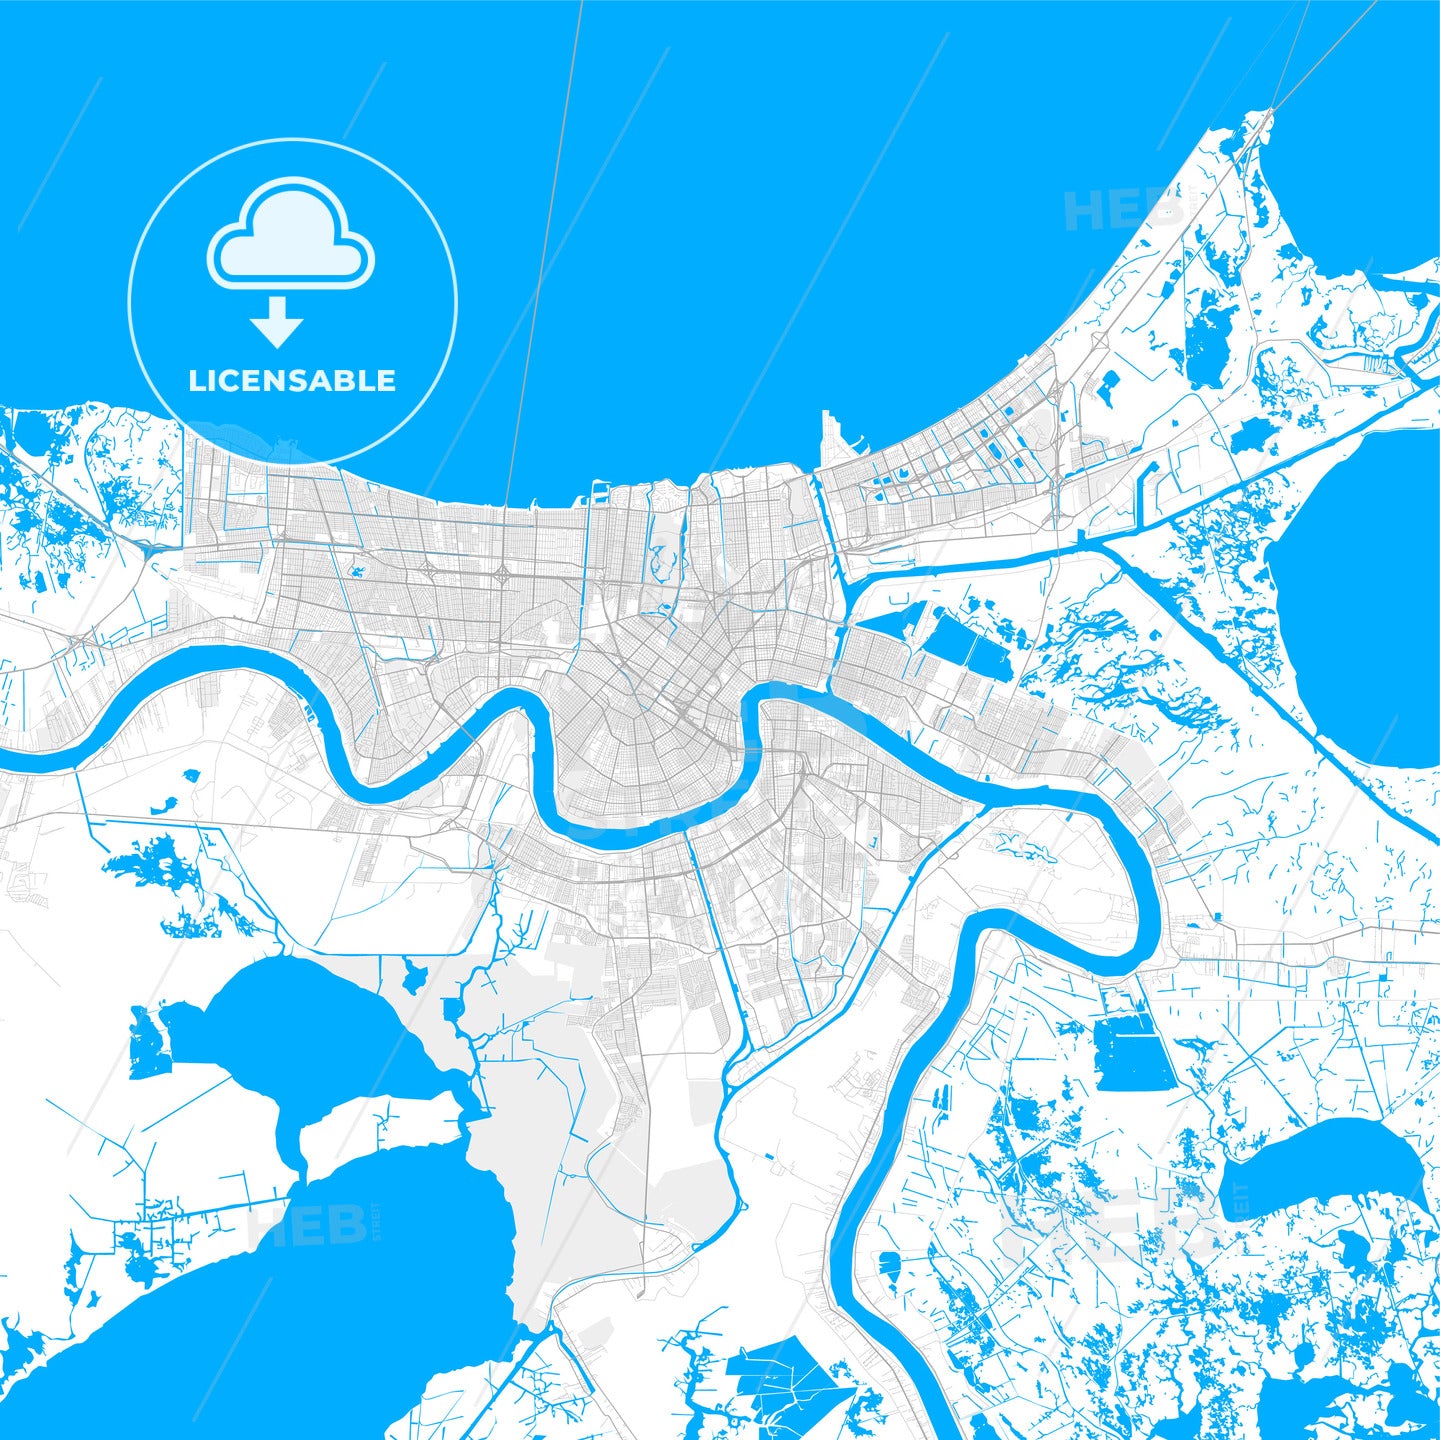 Rich detailed vector map of New Orleans, Louisiana, U.S.A.